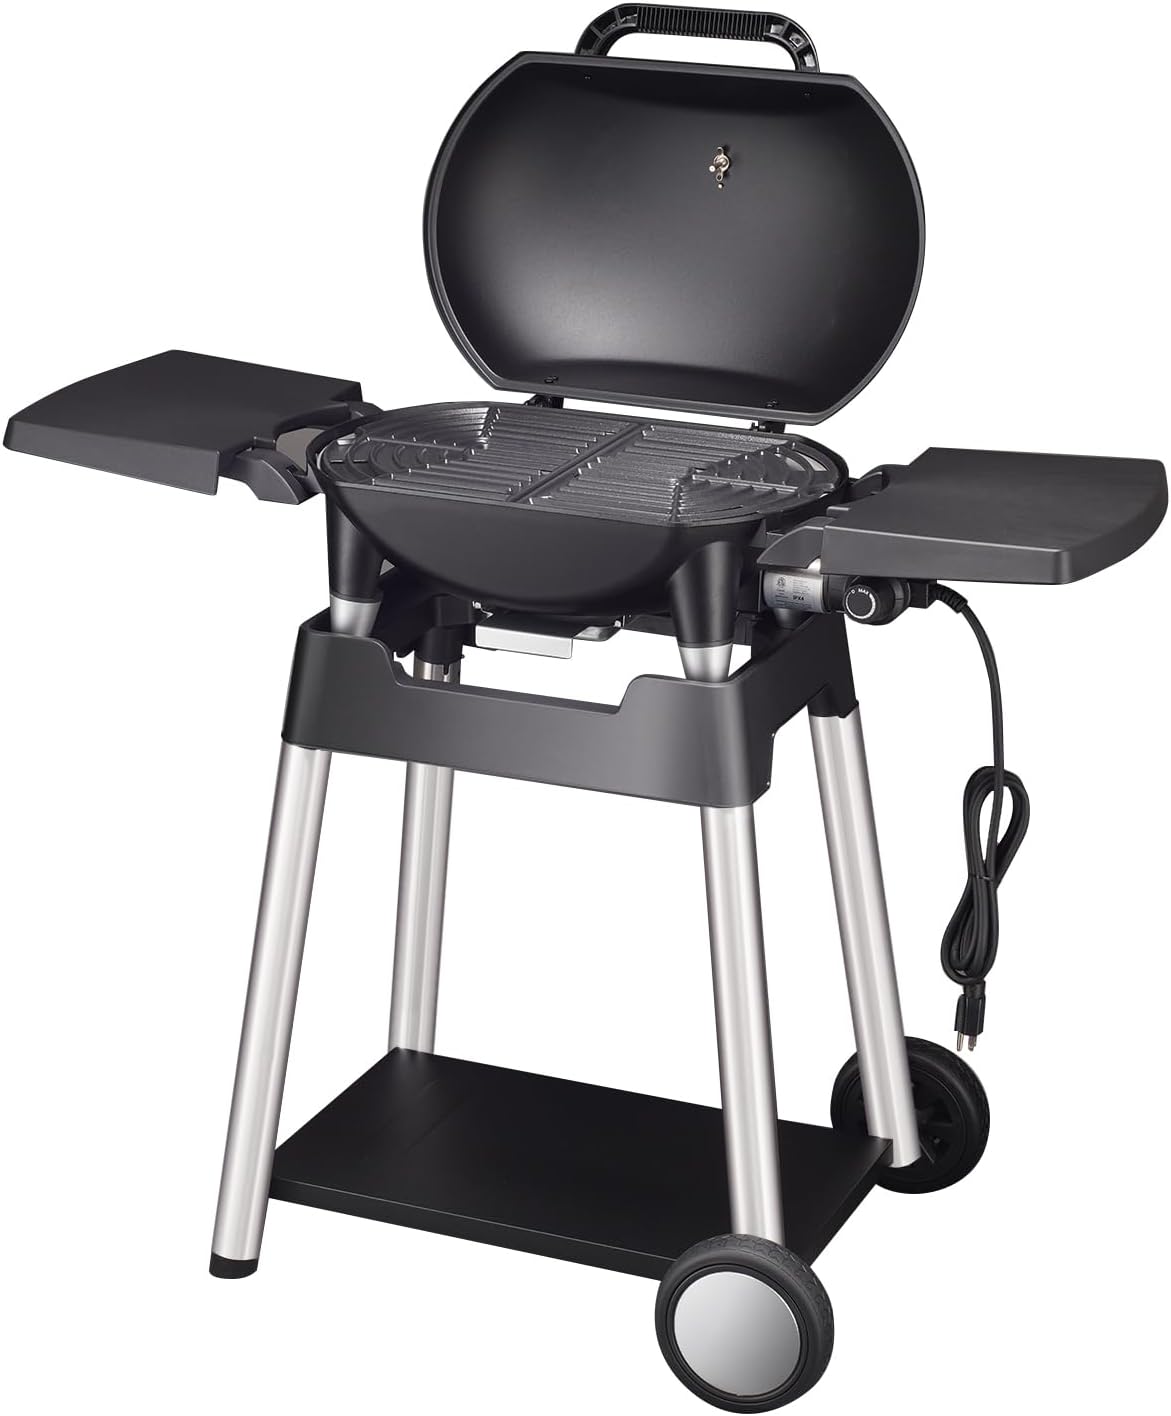 VANSTON Outdoor Electric Barbecue Grill & Smoker Review